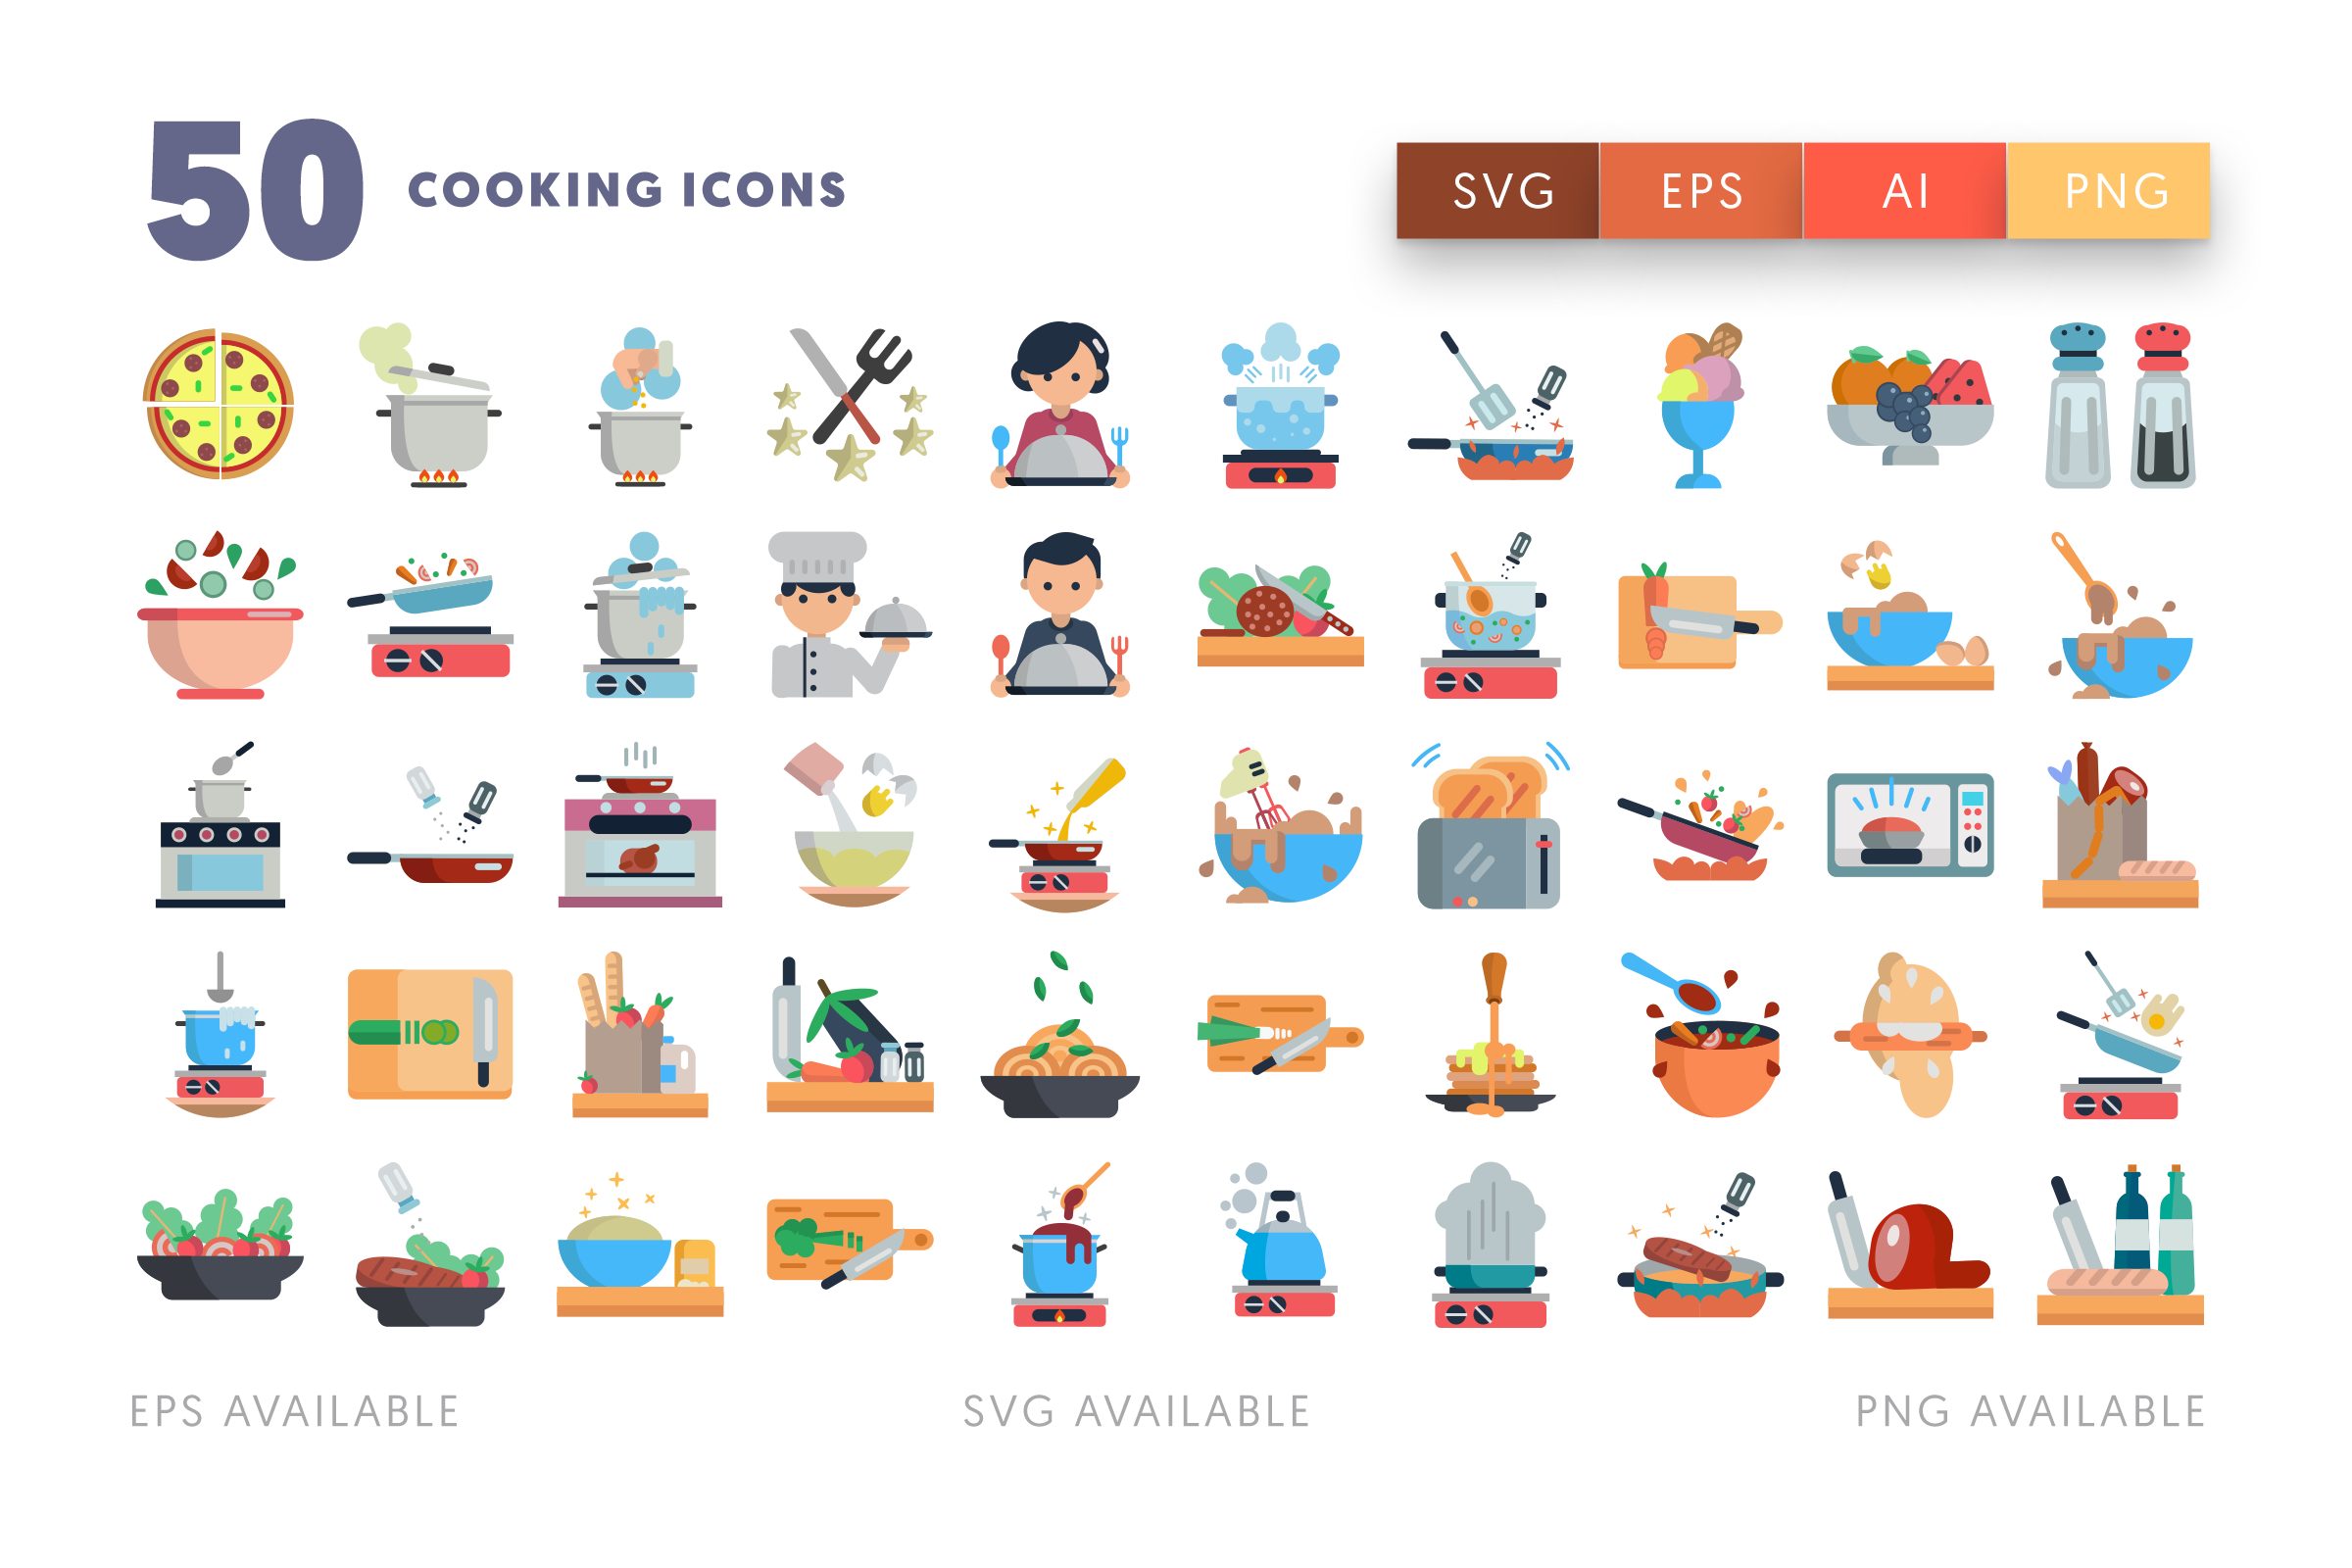 Cooking icons png/svg/eps